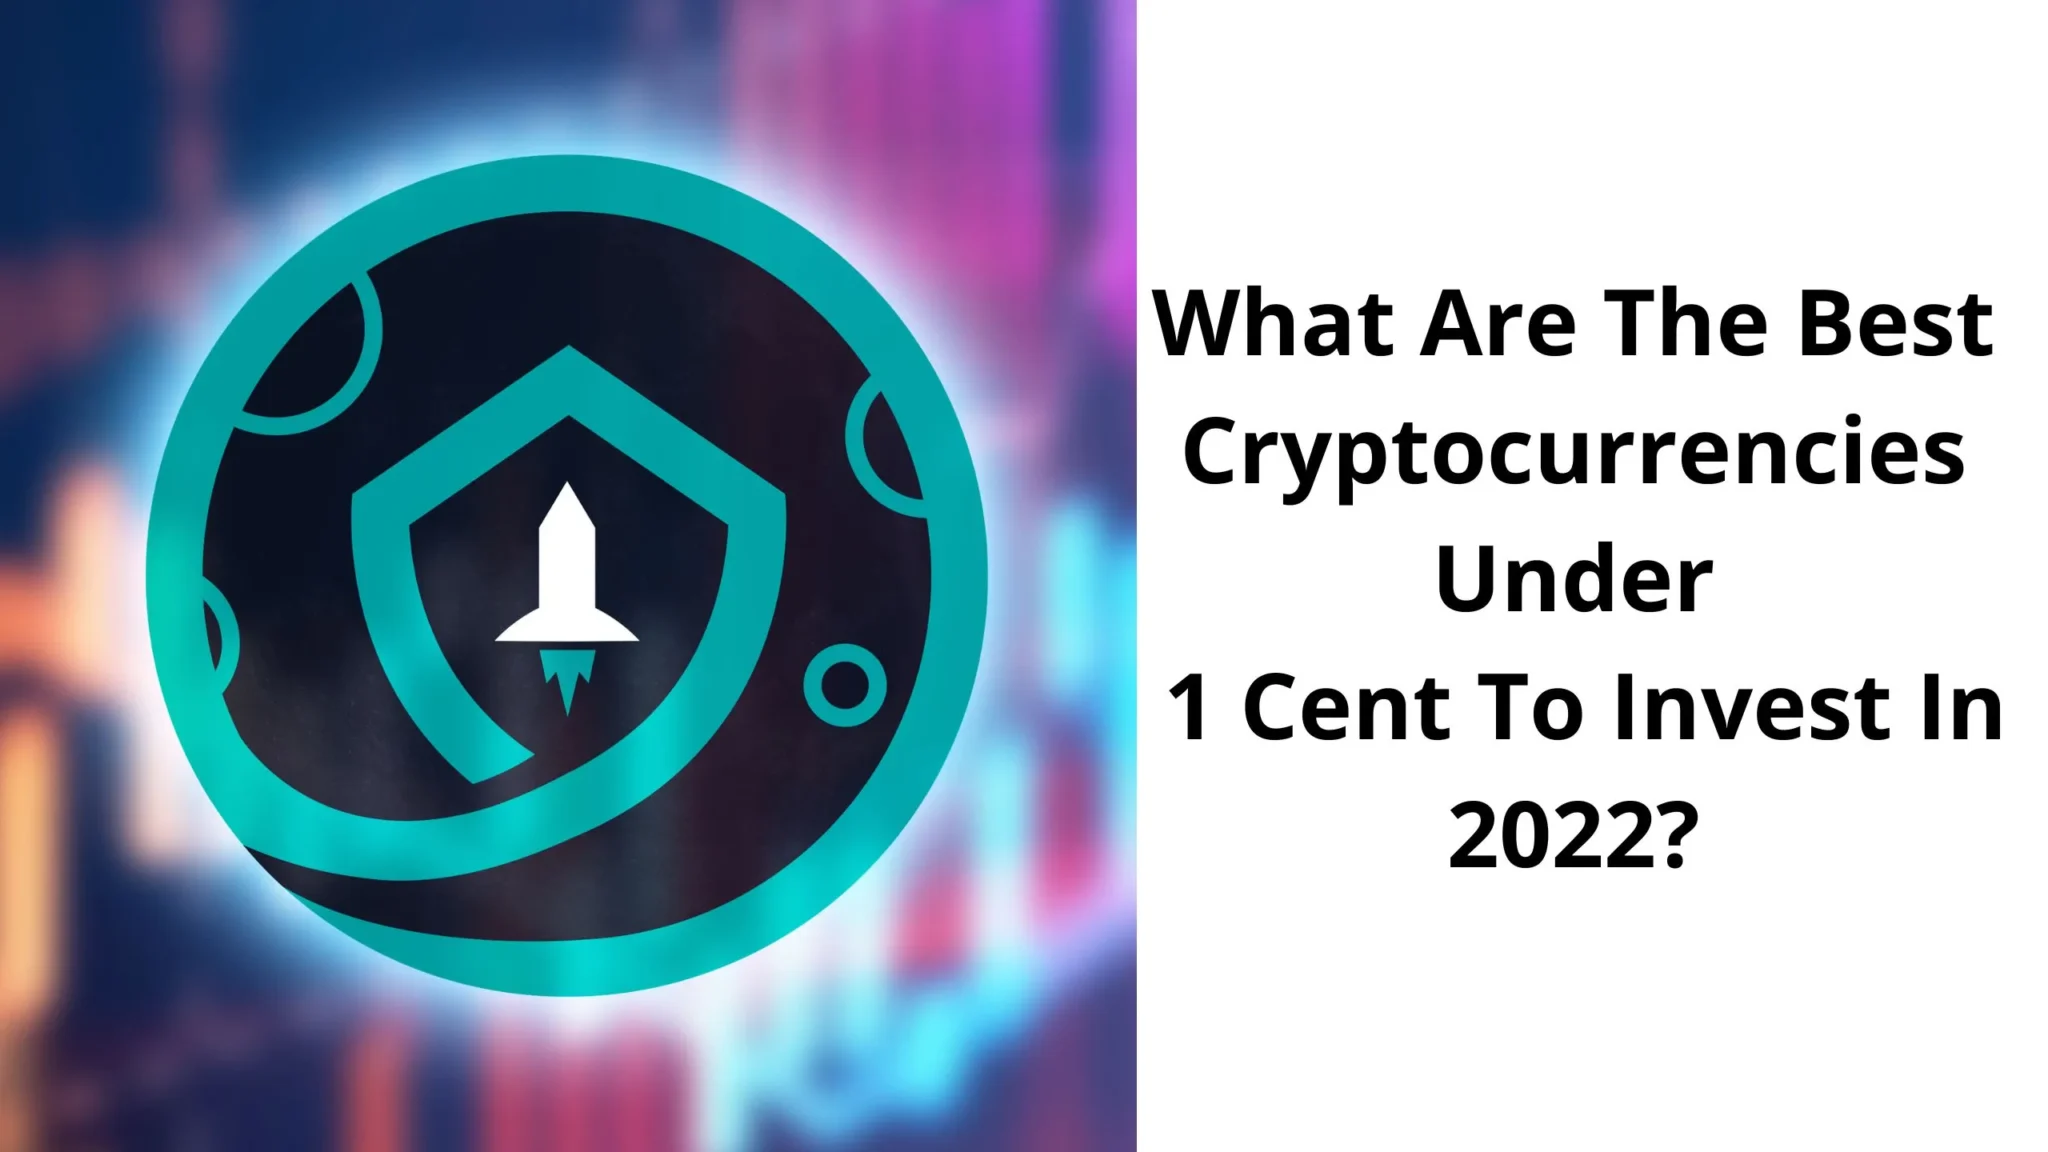 What Are The Best Cryptocurrencies Under 1 Cent To Invest In 2022